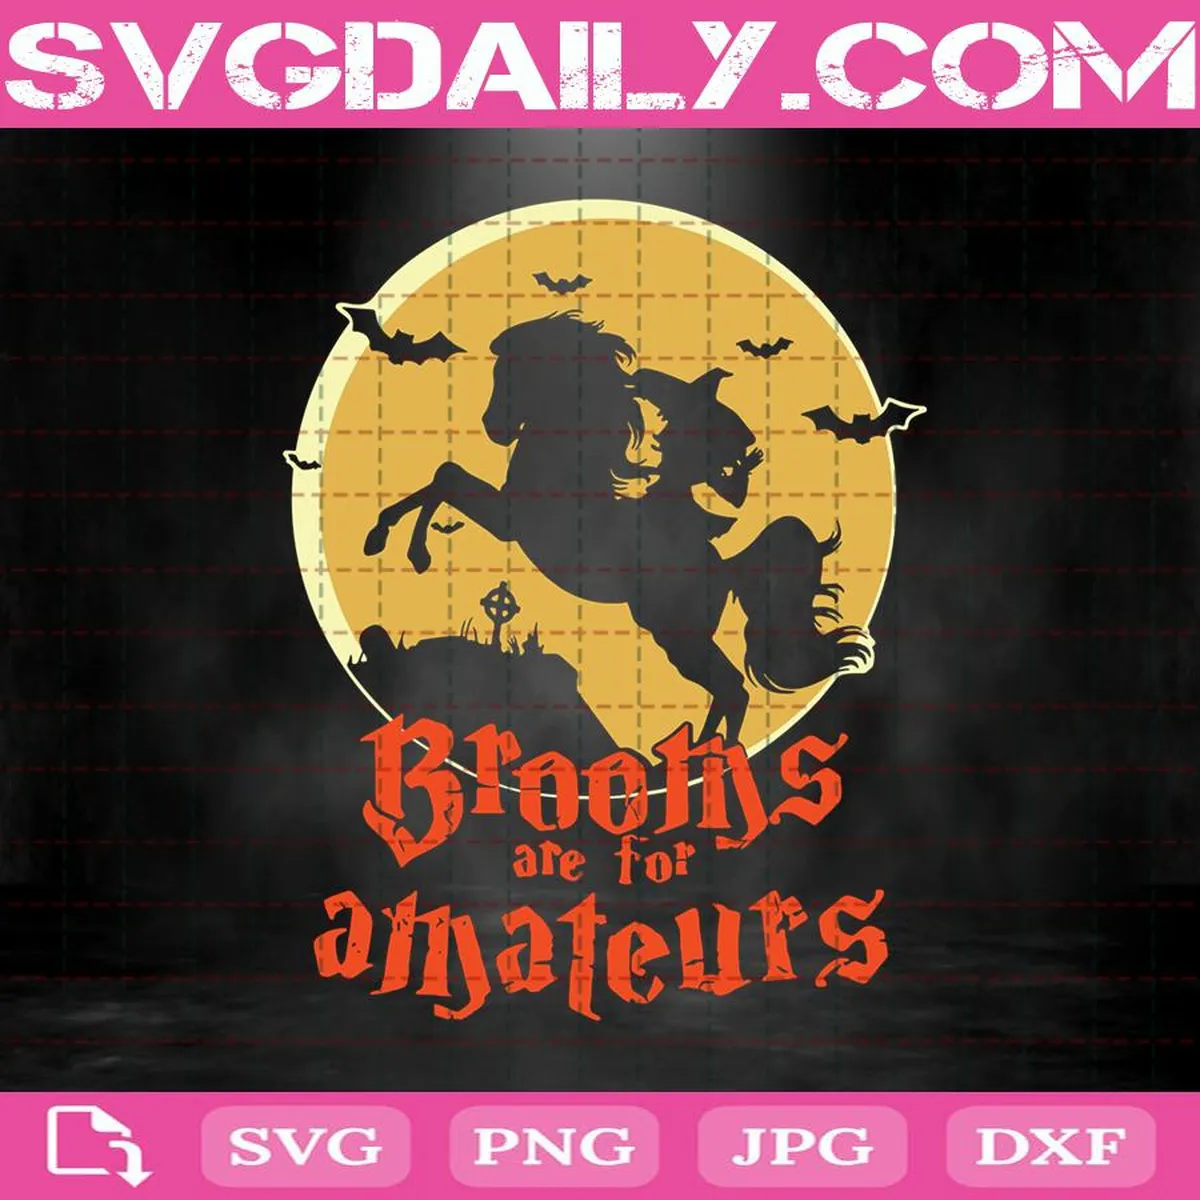 Brooms Are For Amateurs Svg, Witches Ride Horse Brooms Are For Amateurs Svg, Witches Svg, Horse Svg, Brooms Svg, Halloween Svg, Amateurs Monster Truck Svg